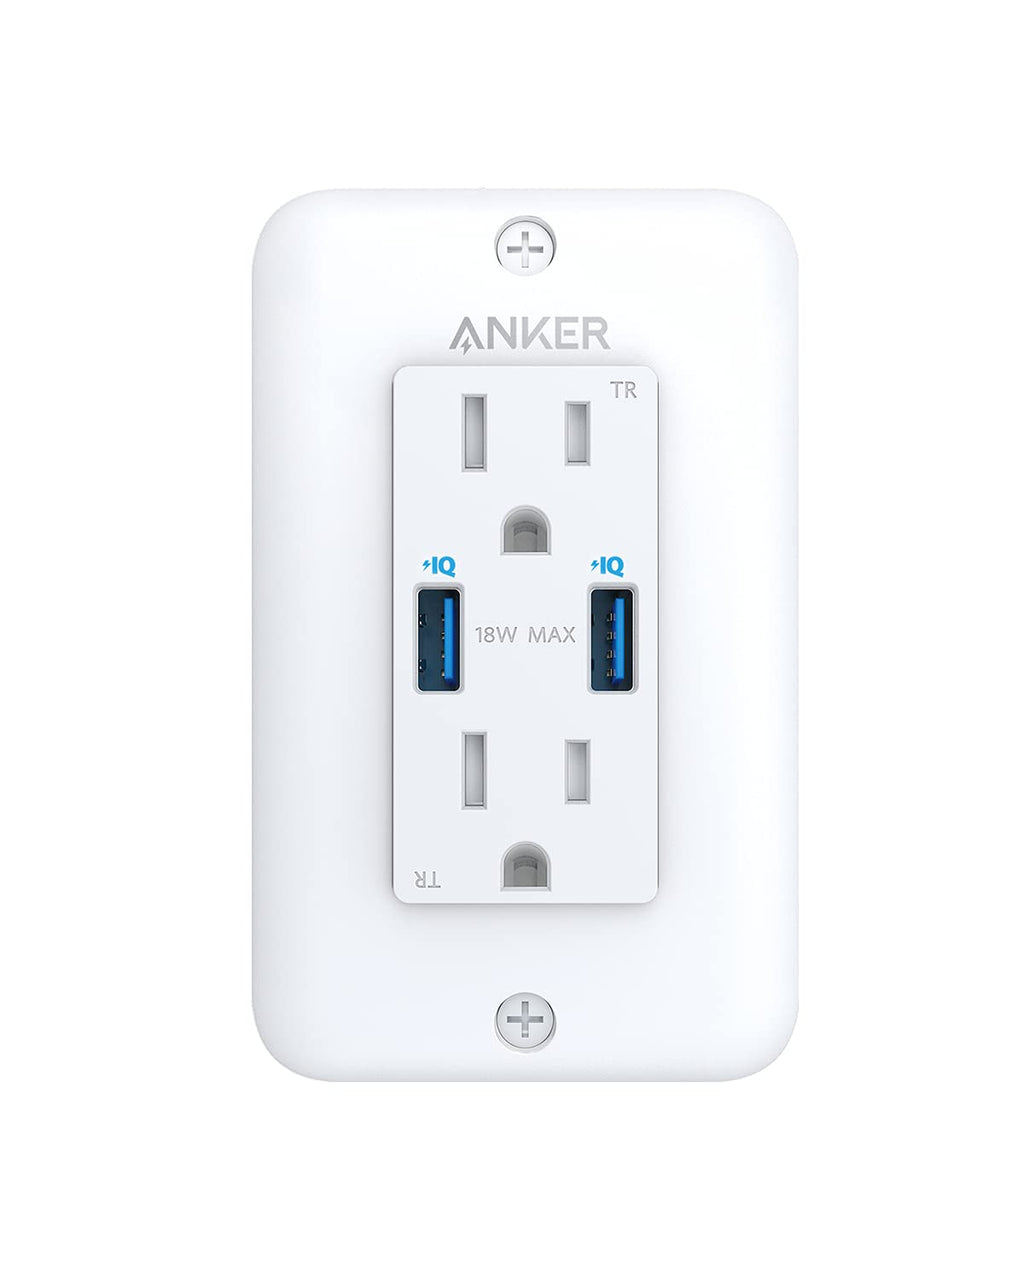 Anker USB Wall Outlets Charger, PowerExtend USB Wall Outlet, 2-Outlets and 2 USB-A,PowerIQ for iPhone Xs/XS Max/XR/X, Galaxy, easy Installation, Wall Plate Included, ETL Listed